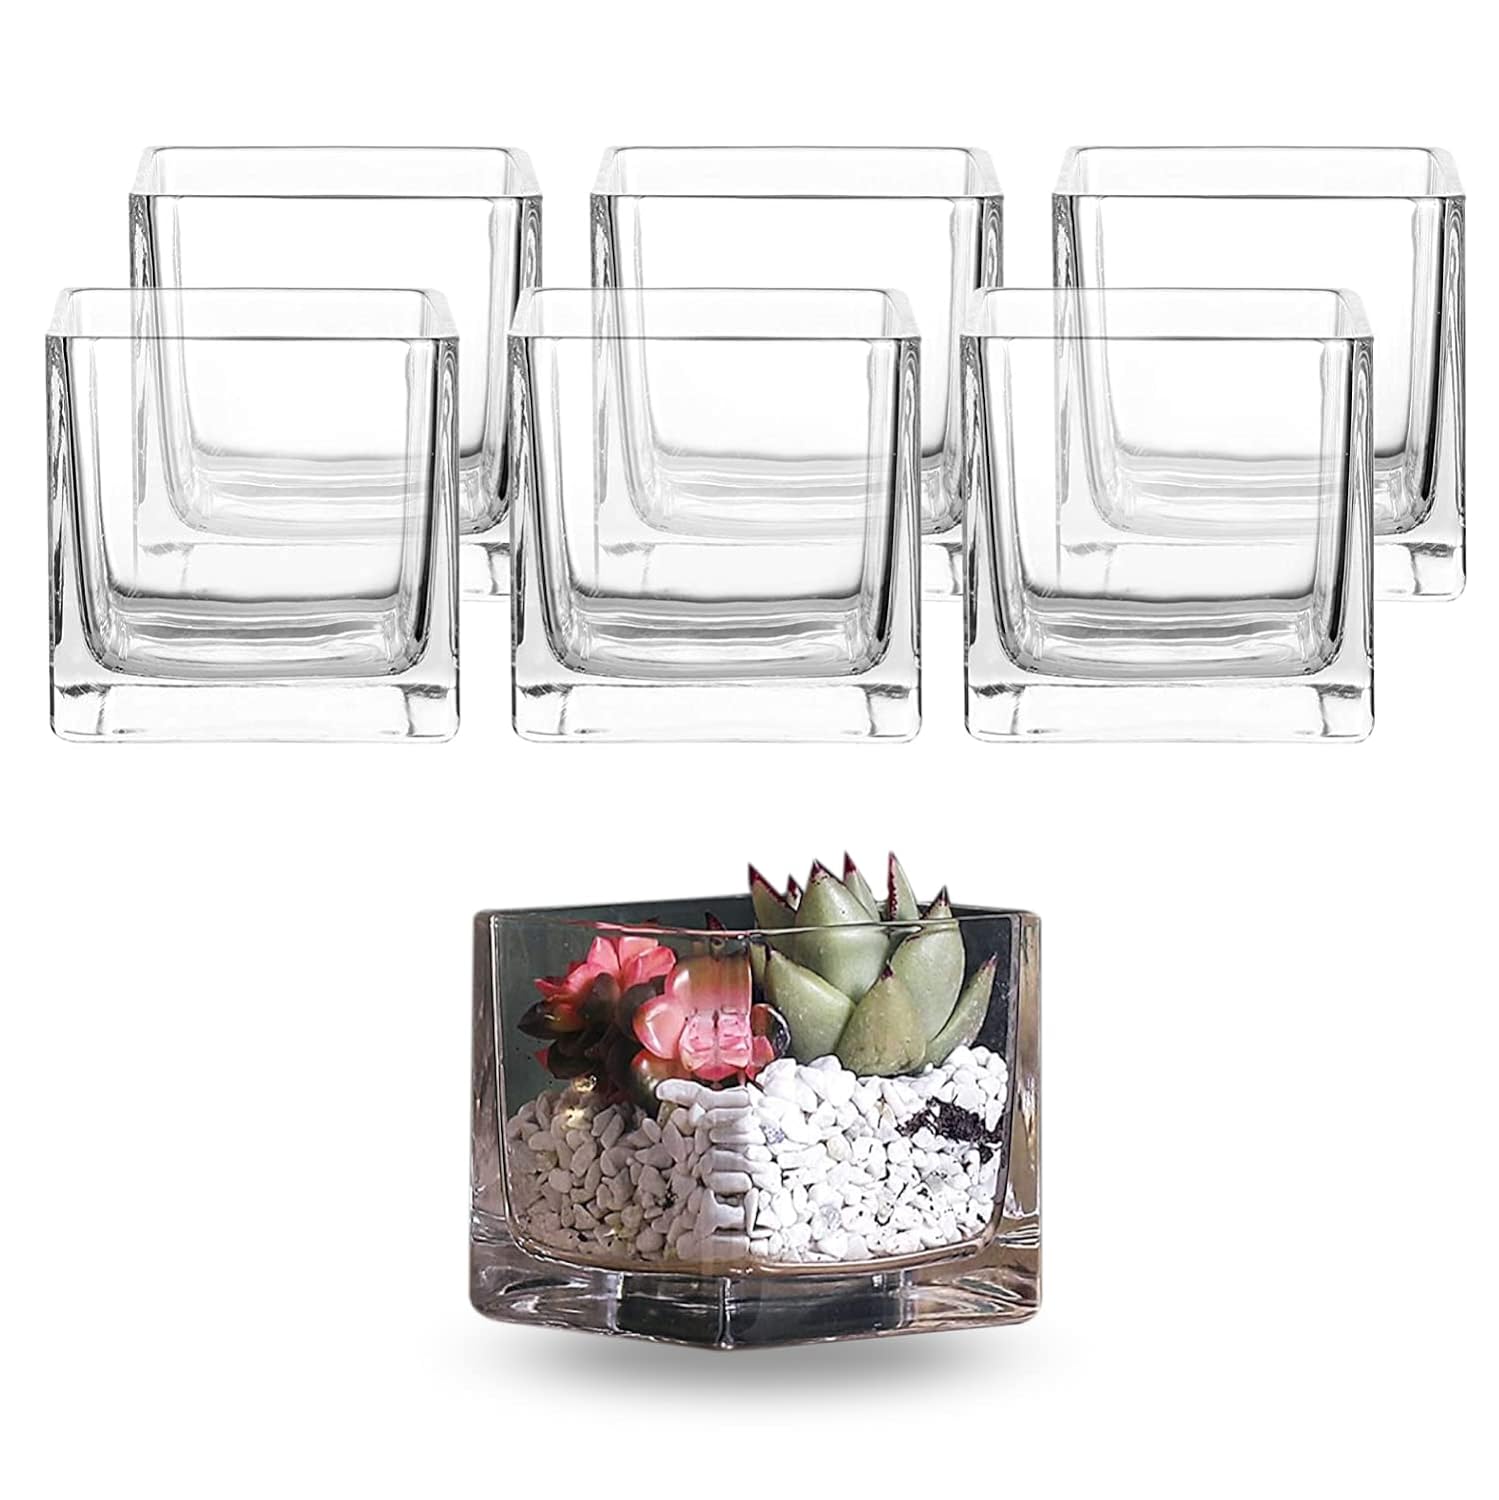 Whole Housewares Square Glass Flower Vase Centerpiece Set - 6 Pack Botanical Arrangements and Candle Holder Decoration - Thick Glass and A Stable Weighted Bottom - Clear Cube, 3.9L x 3.9W x 3.9H